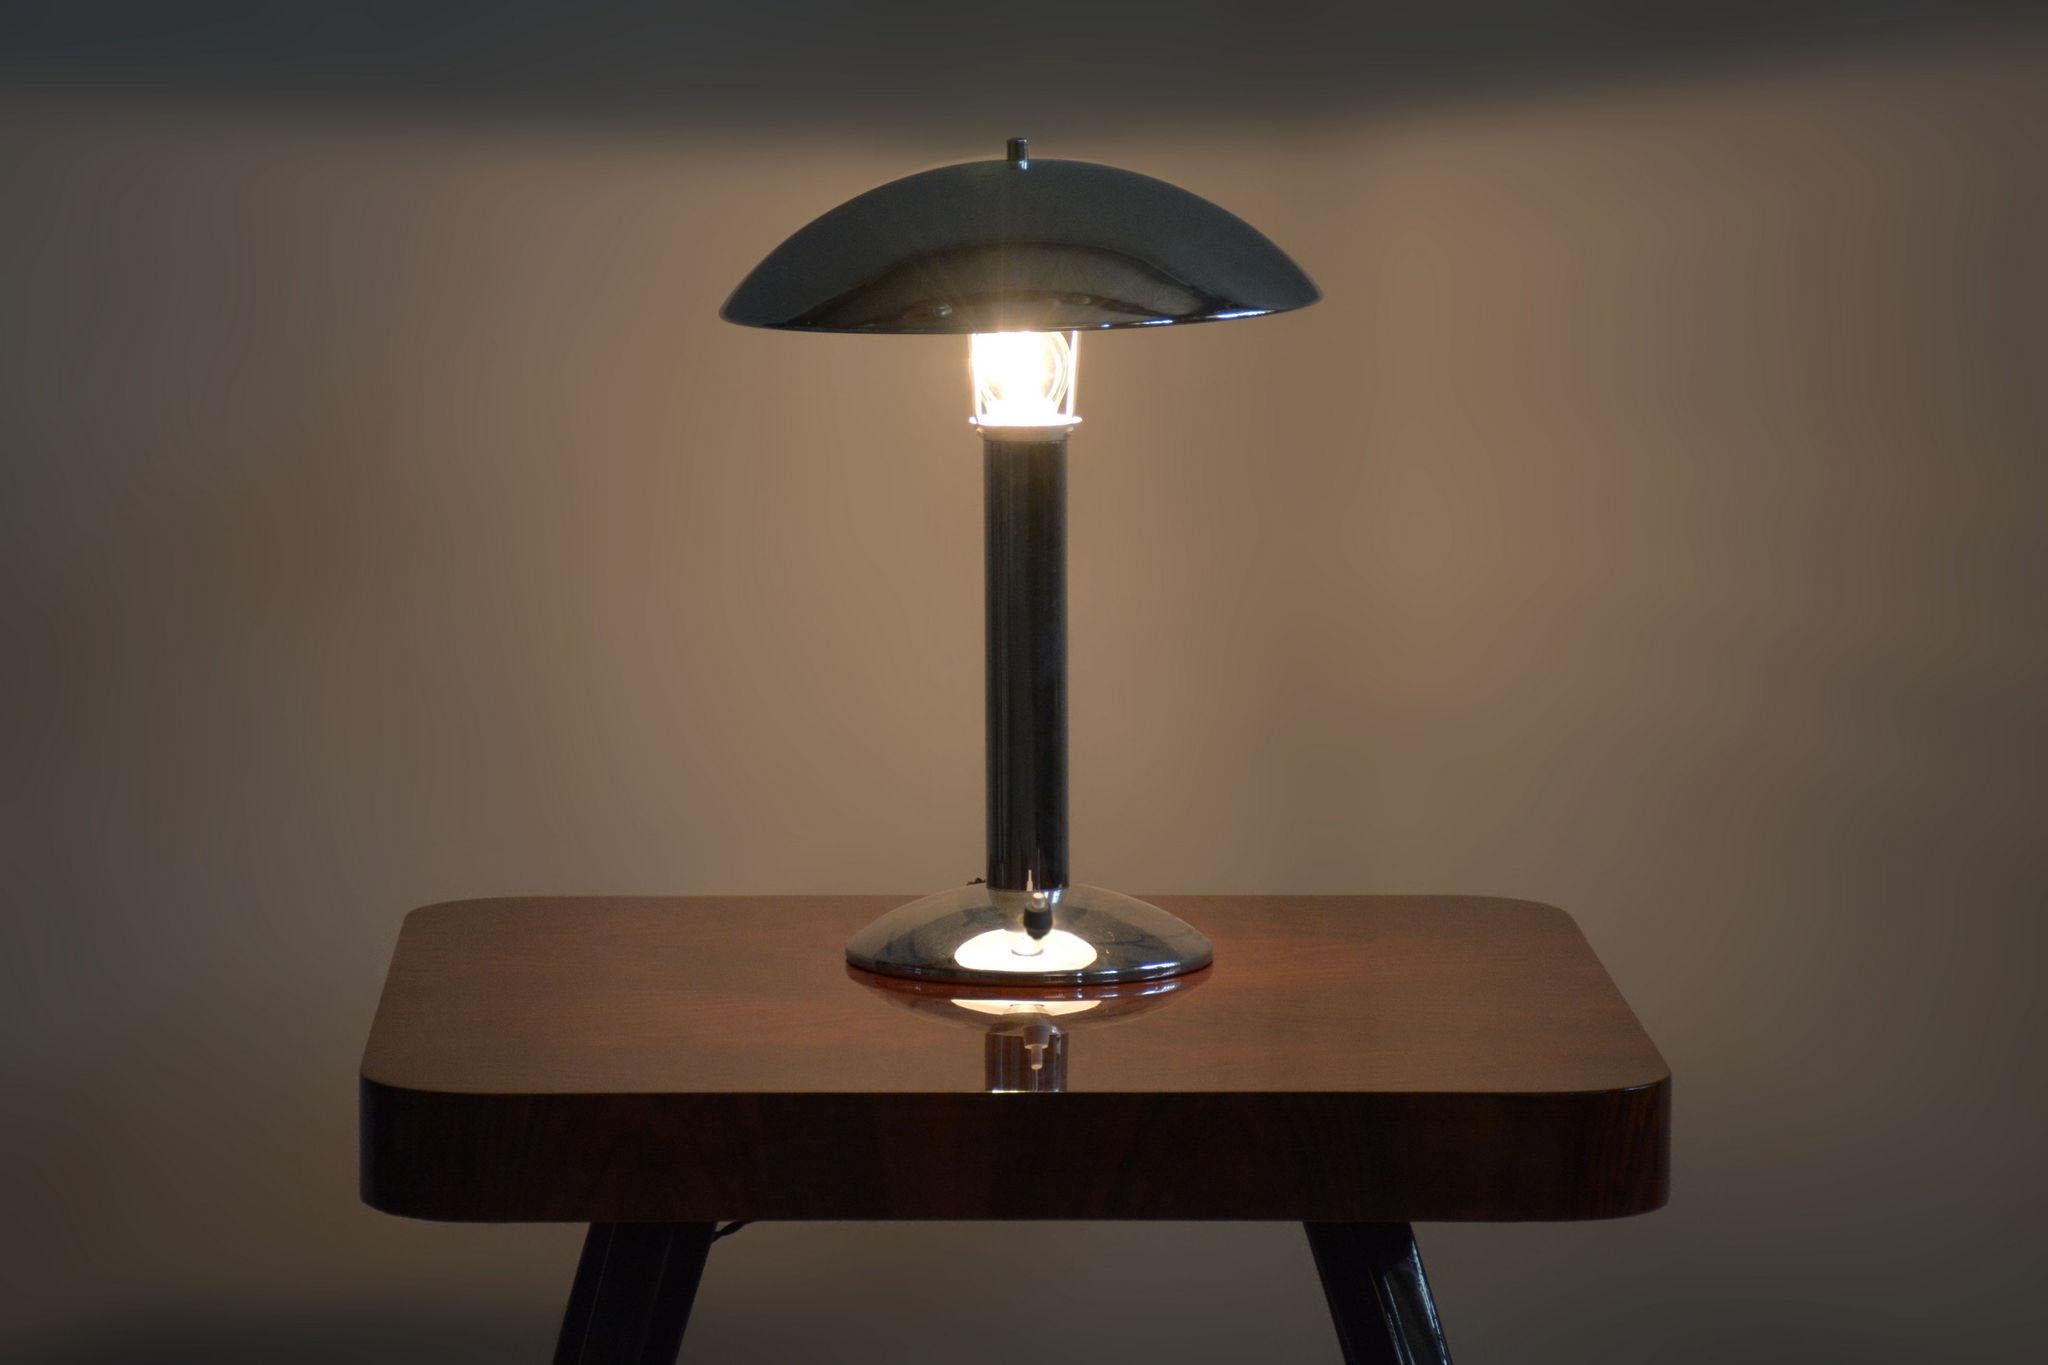 Original ArtDeco Table Lamp. Fully Functional Electrification.

Material: Chrome-plated Steel
Source: Czechia (Czechoslovakia)
Period: 1930-1939

The chrome parts have been cleaned and professionally restored. 

This item features classic Art Deco